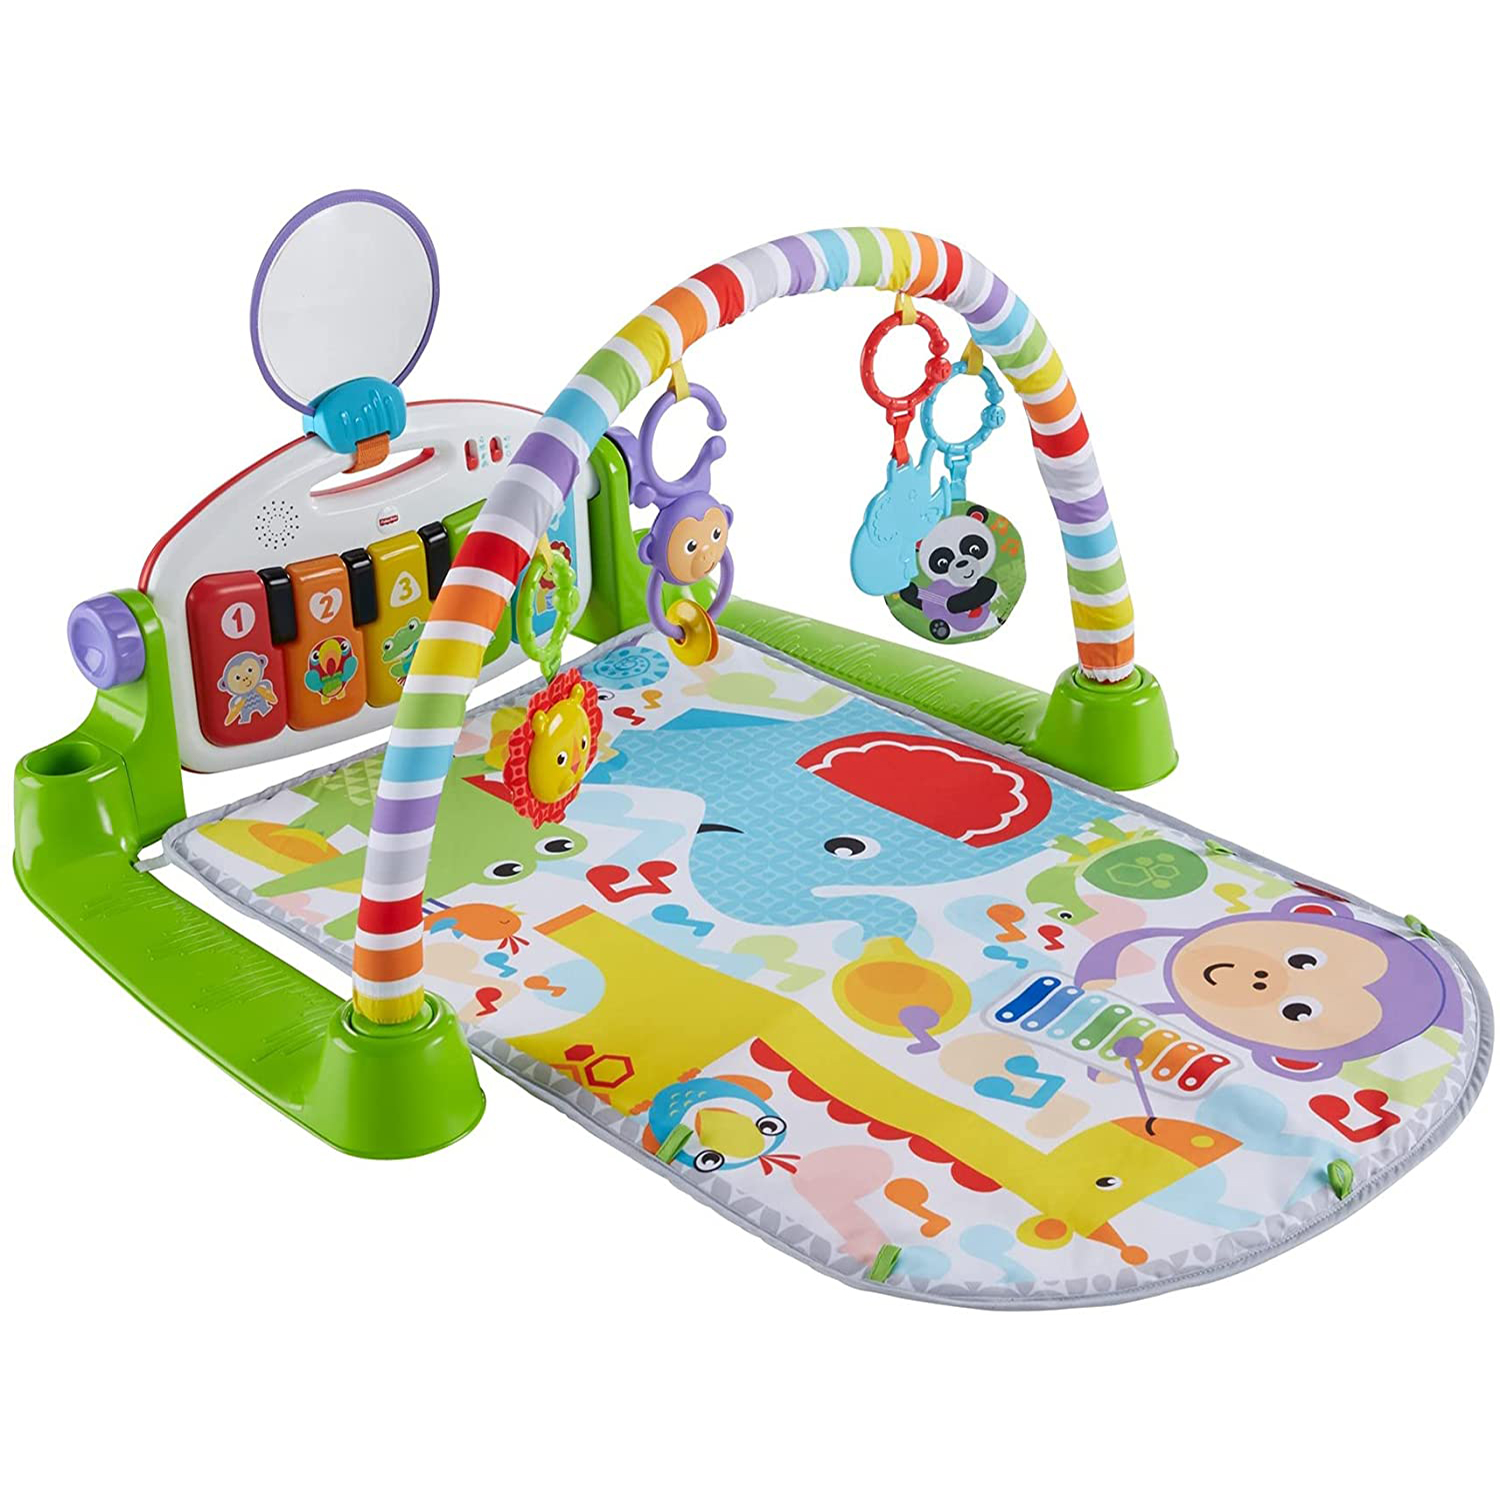 Best Toy for 6-Month-Olds: Fisher-Price Deluxe Kick & Play Piano Gym